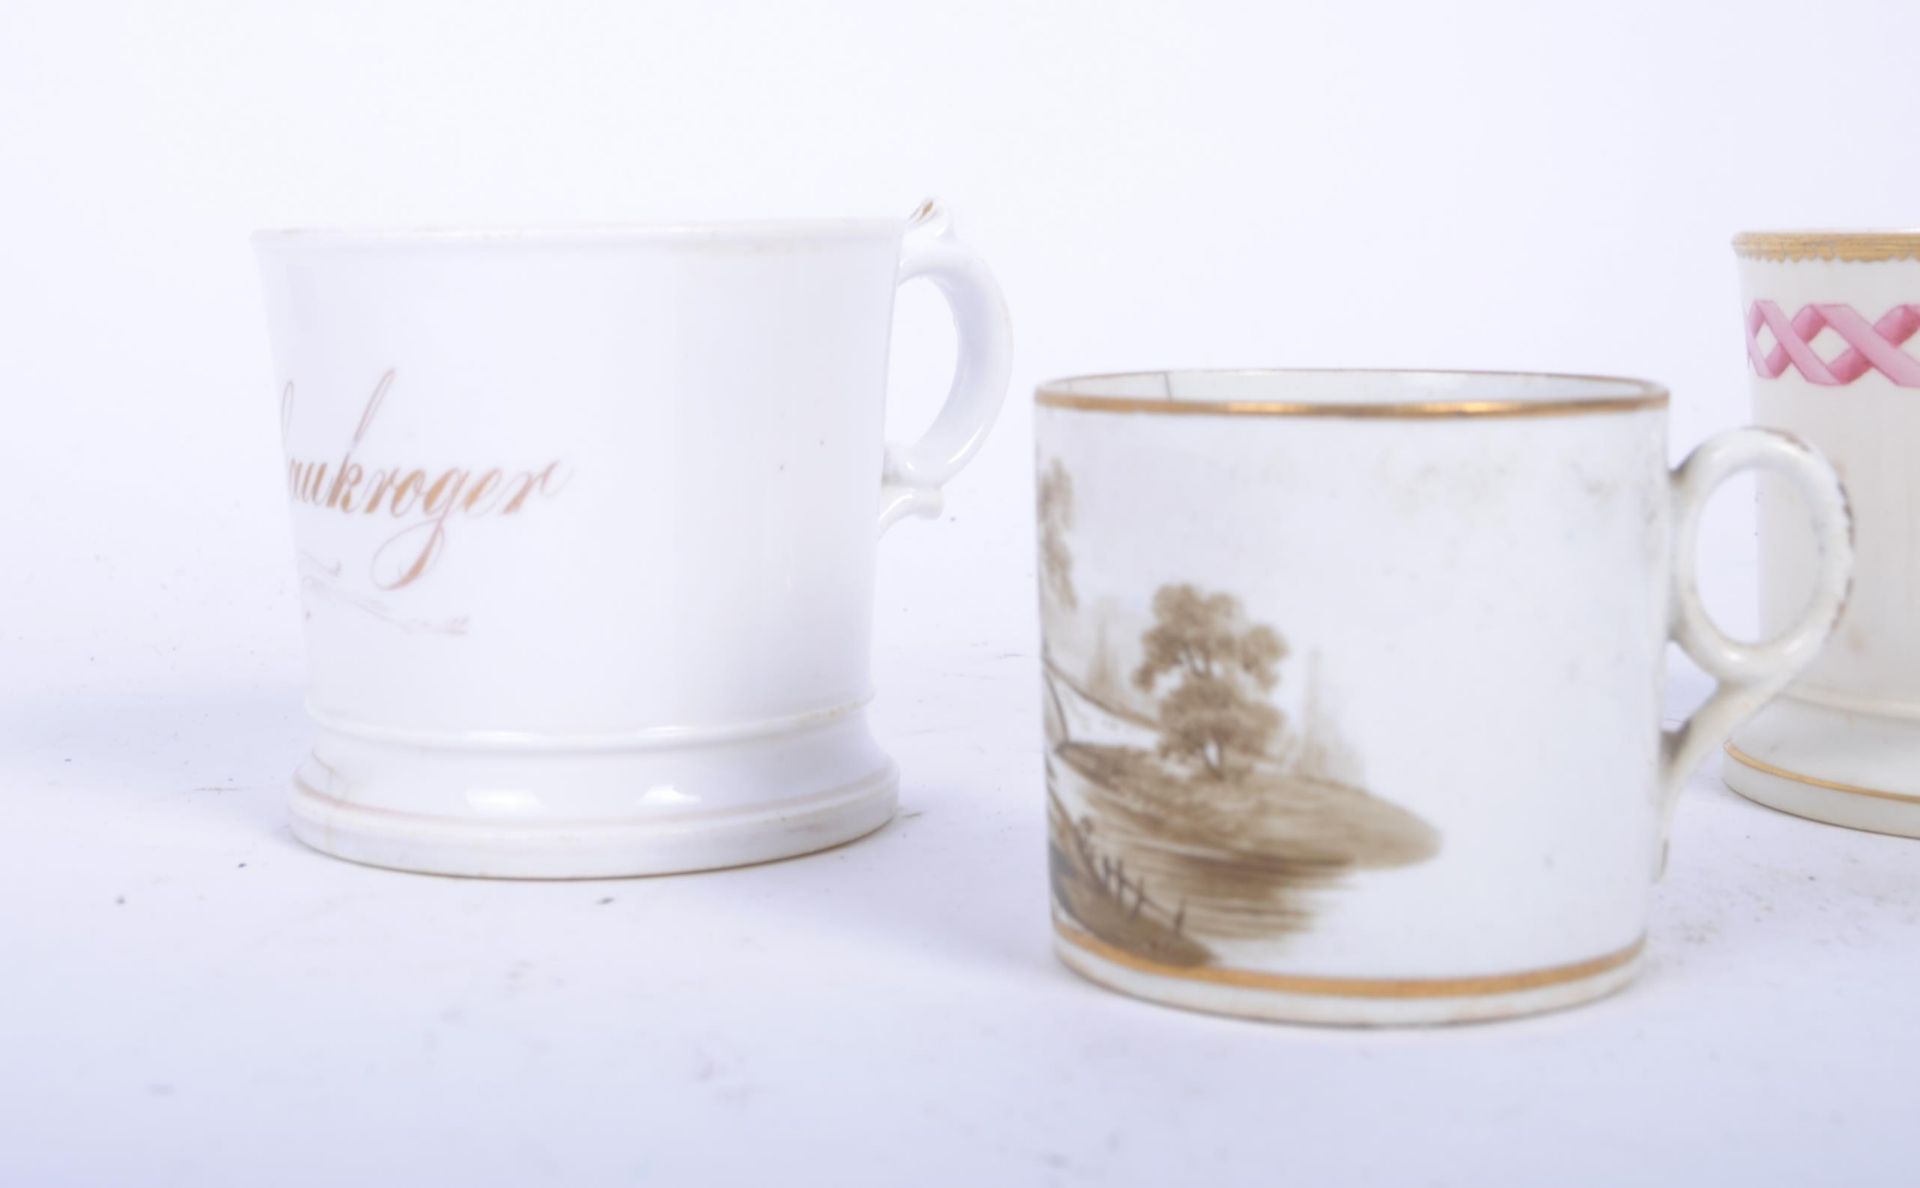 COLLECTION OF 19TH CENTURY STAFFORDSHIRE MUGS 1855 (3) - Image 3 of 8